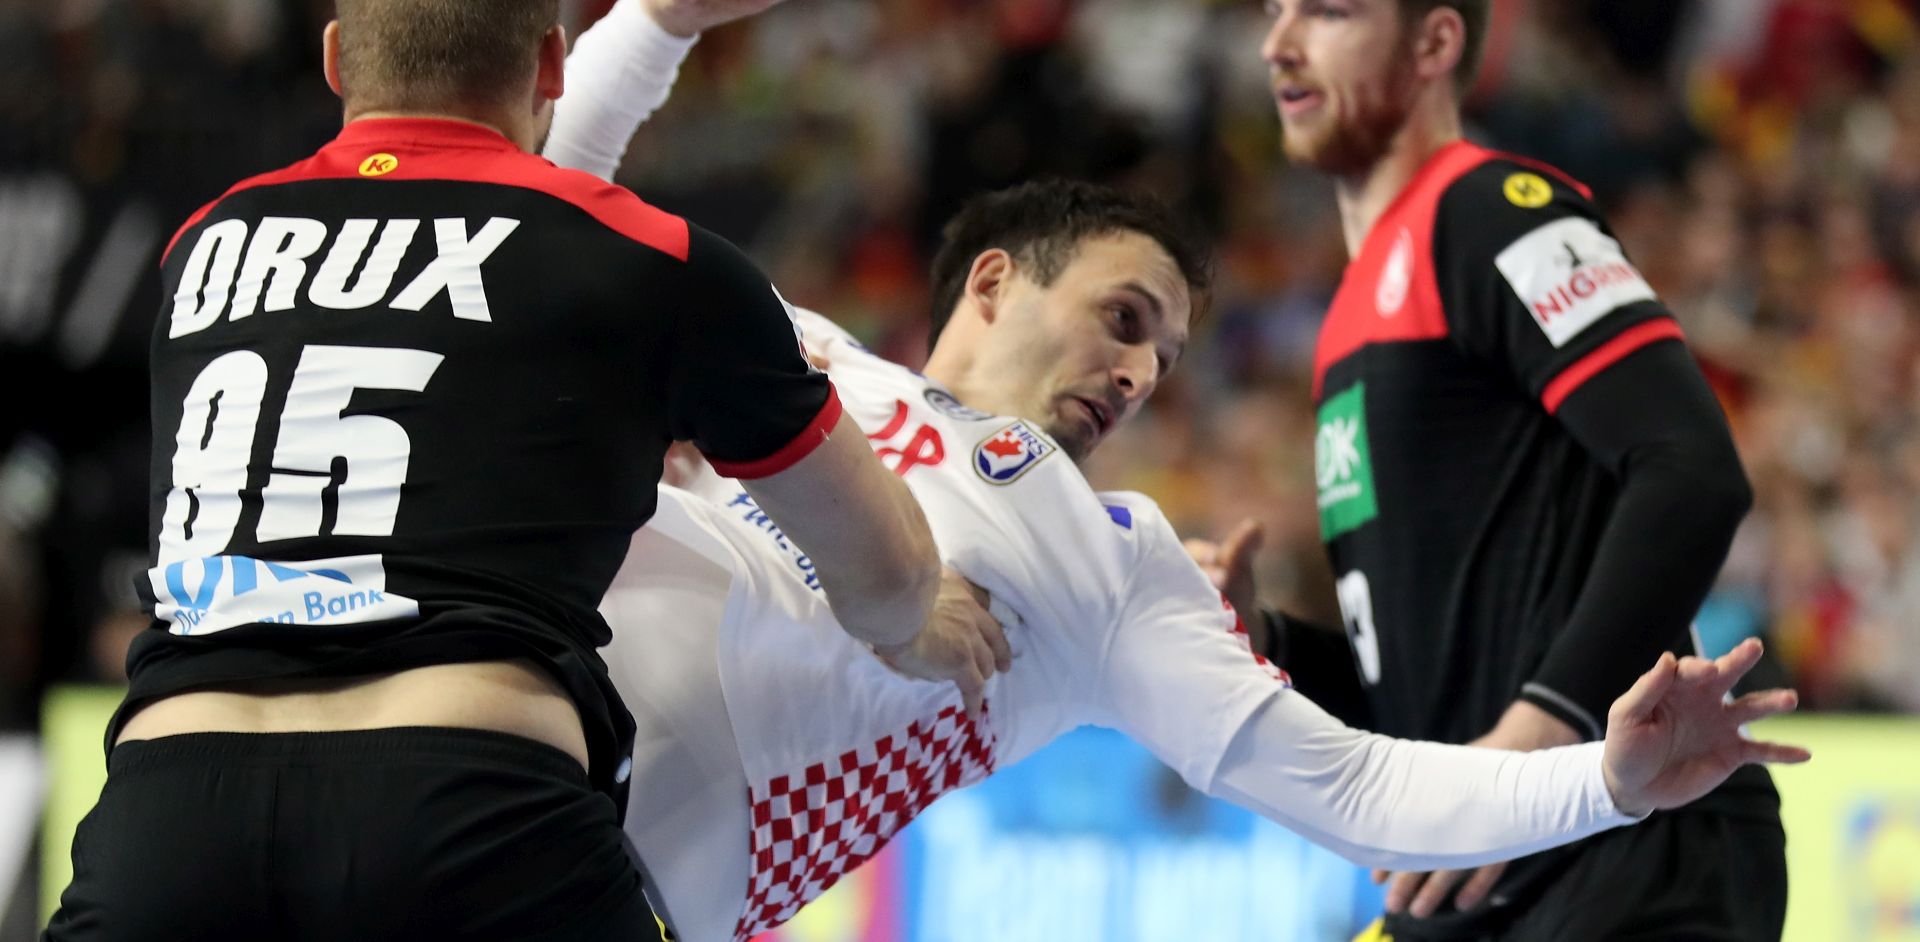 epa07307335 Igor Karacic (C) of Croatia in action against Paul Drux (L) of Germany during the main round group one match between Croatia and Germany at the IHF Men's Handball World Championship in Cologne, Germany, 21 January 2019.  EPA/FRIEDEMANN VOGEL